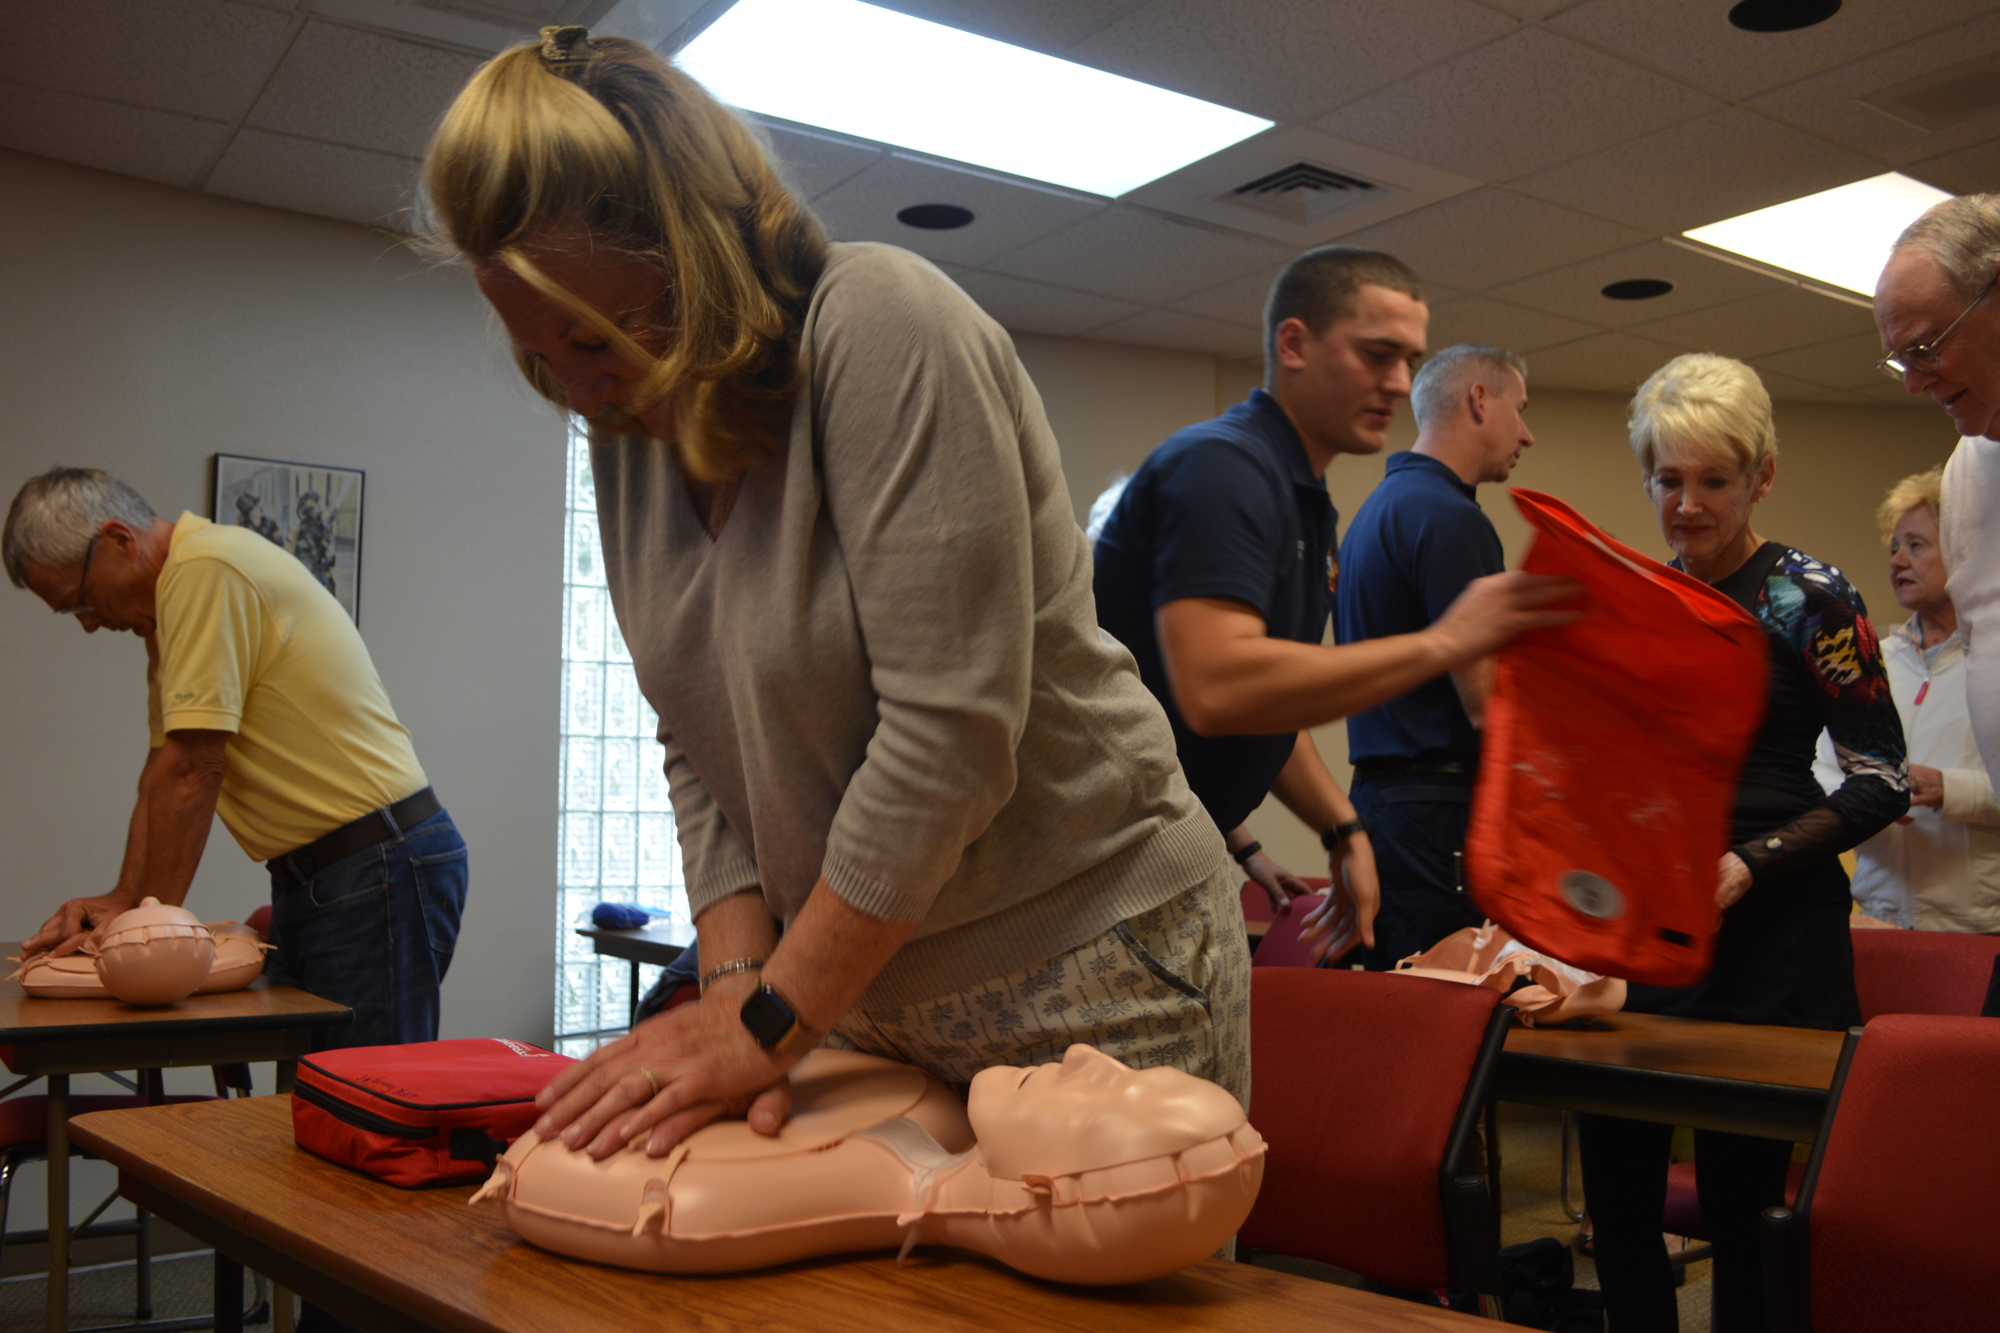 Andrea DeFeo (foreground) practices giving hands-only CPR on a dummy Jan. 23 at the Longboat Key fire station.